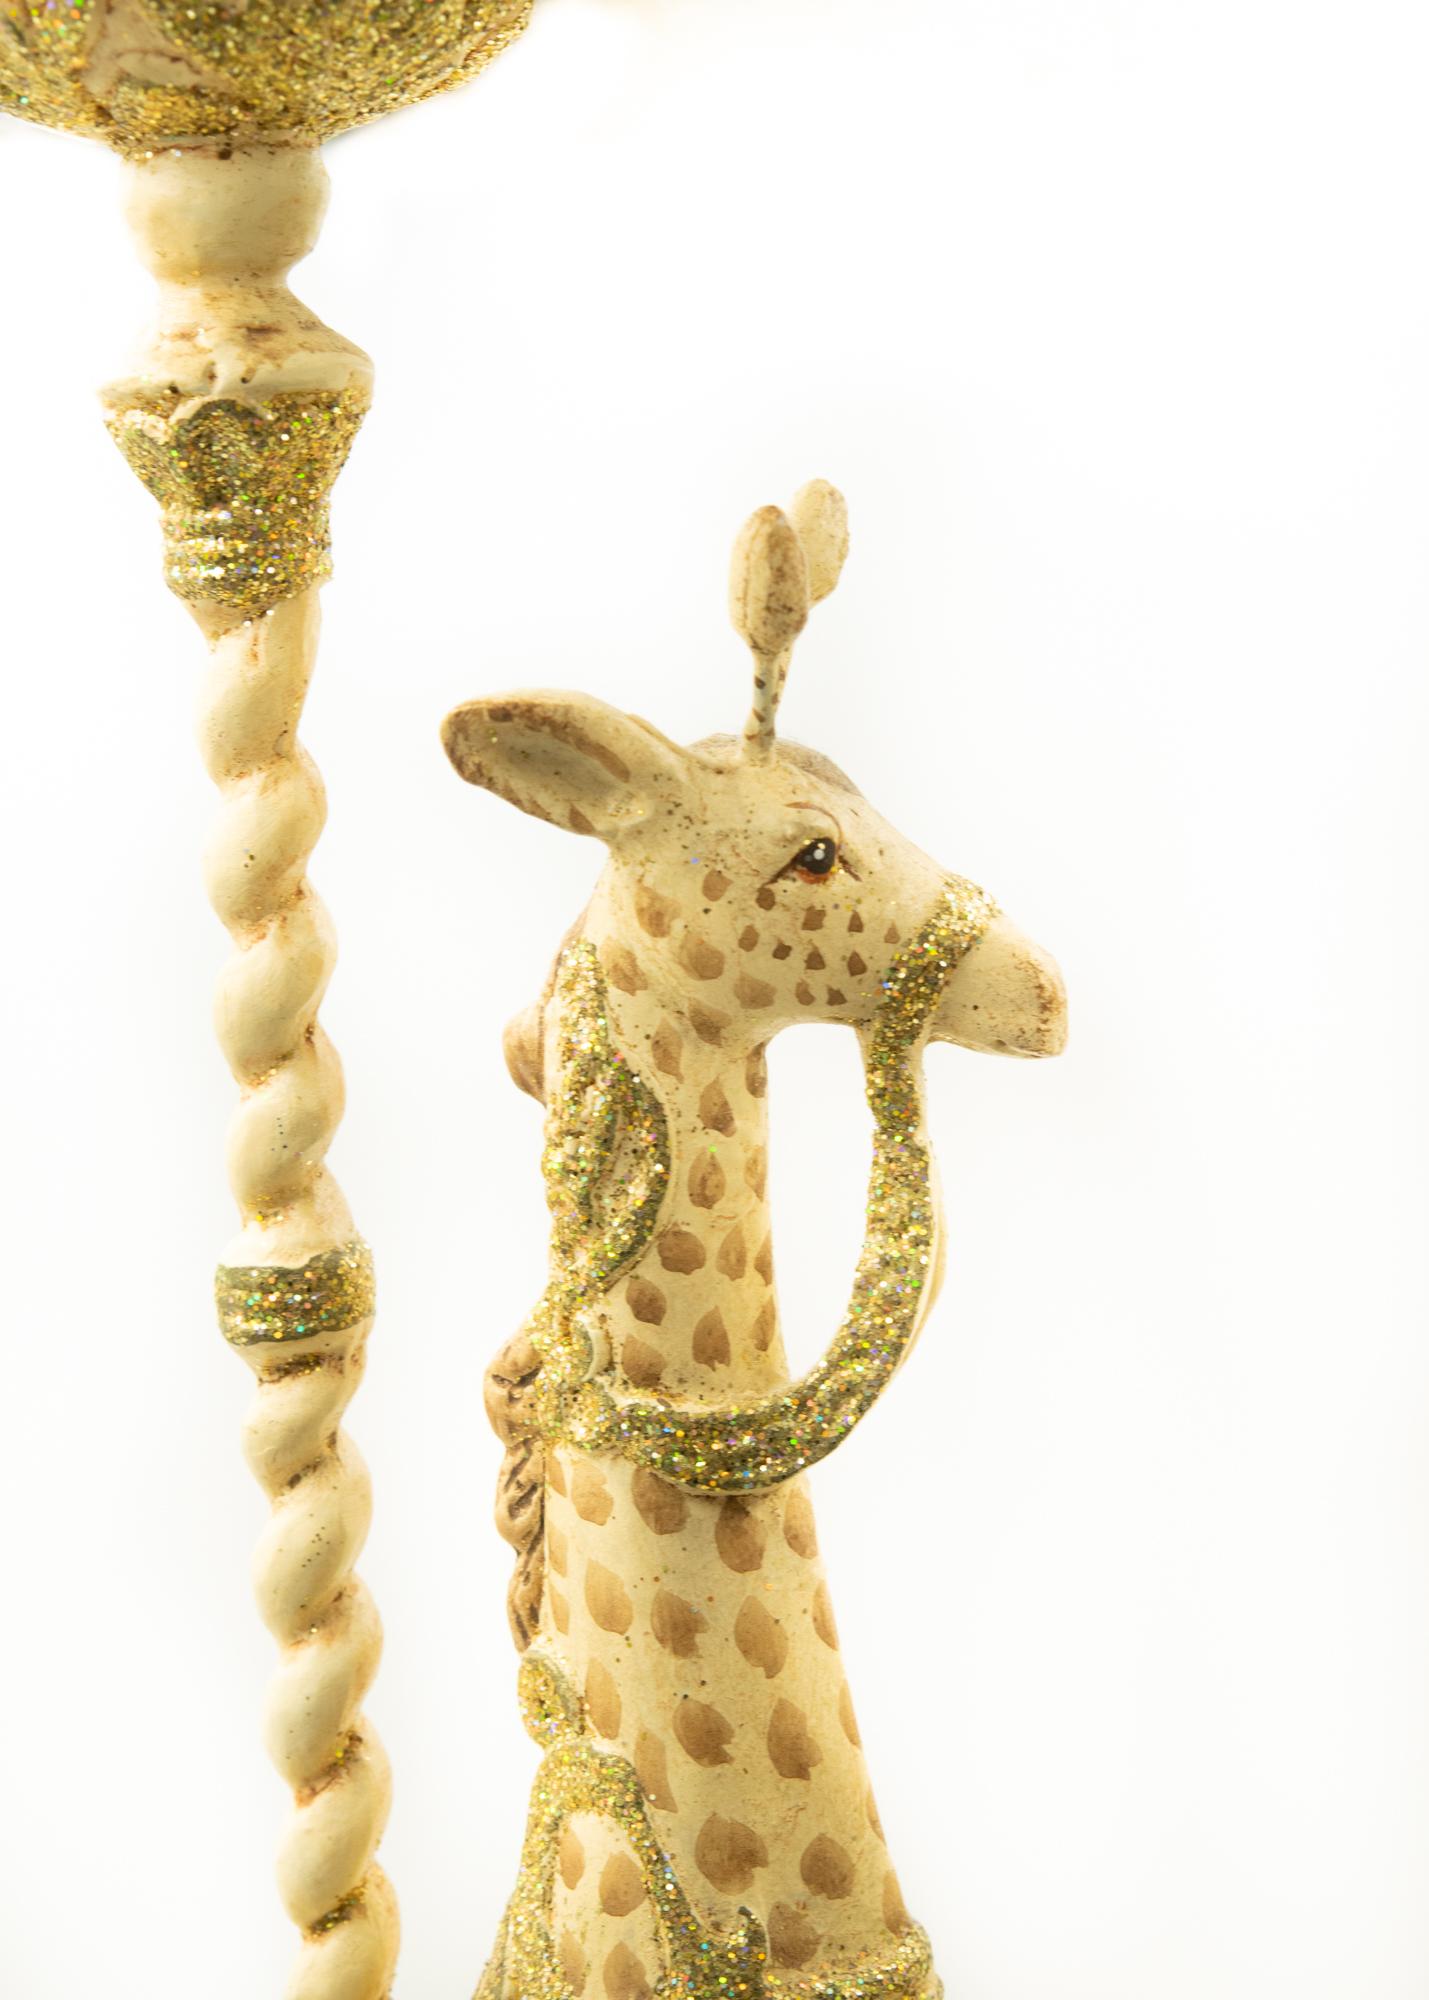 These fun caliope giraffe candlesticks are perfect decor for a children's party, an African Theme Party of Just Plain Funky. They are gilt and easy adornments for whatever you choose.